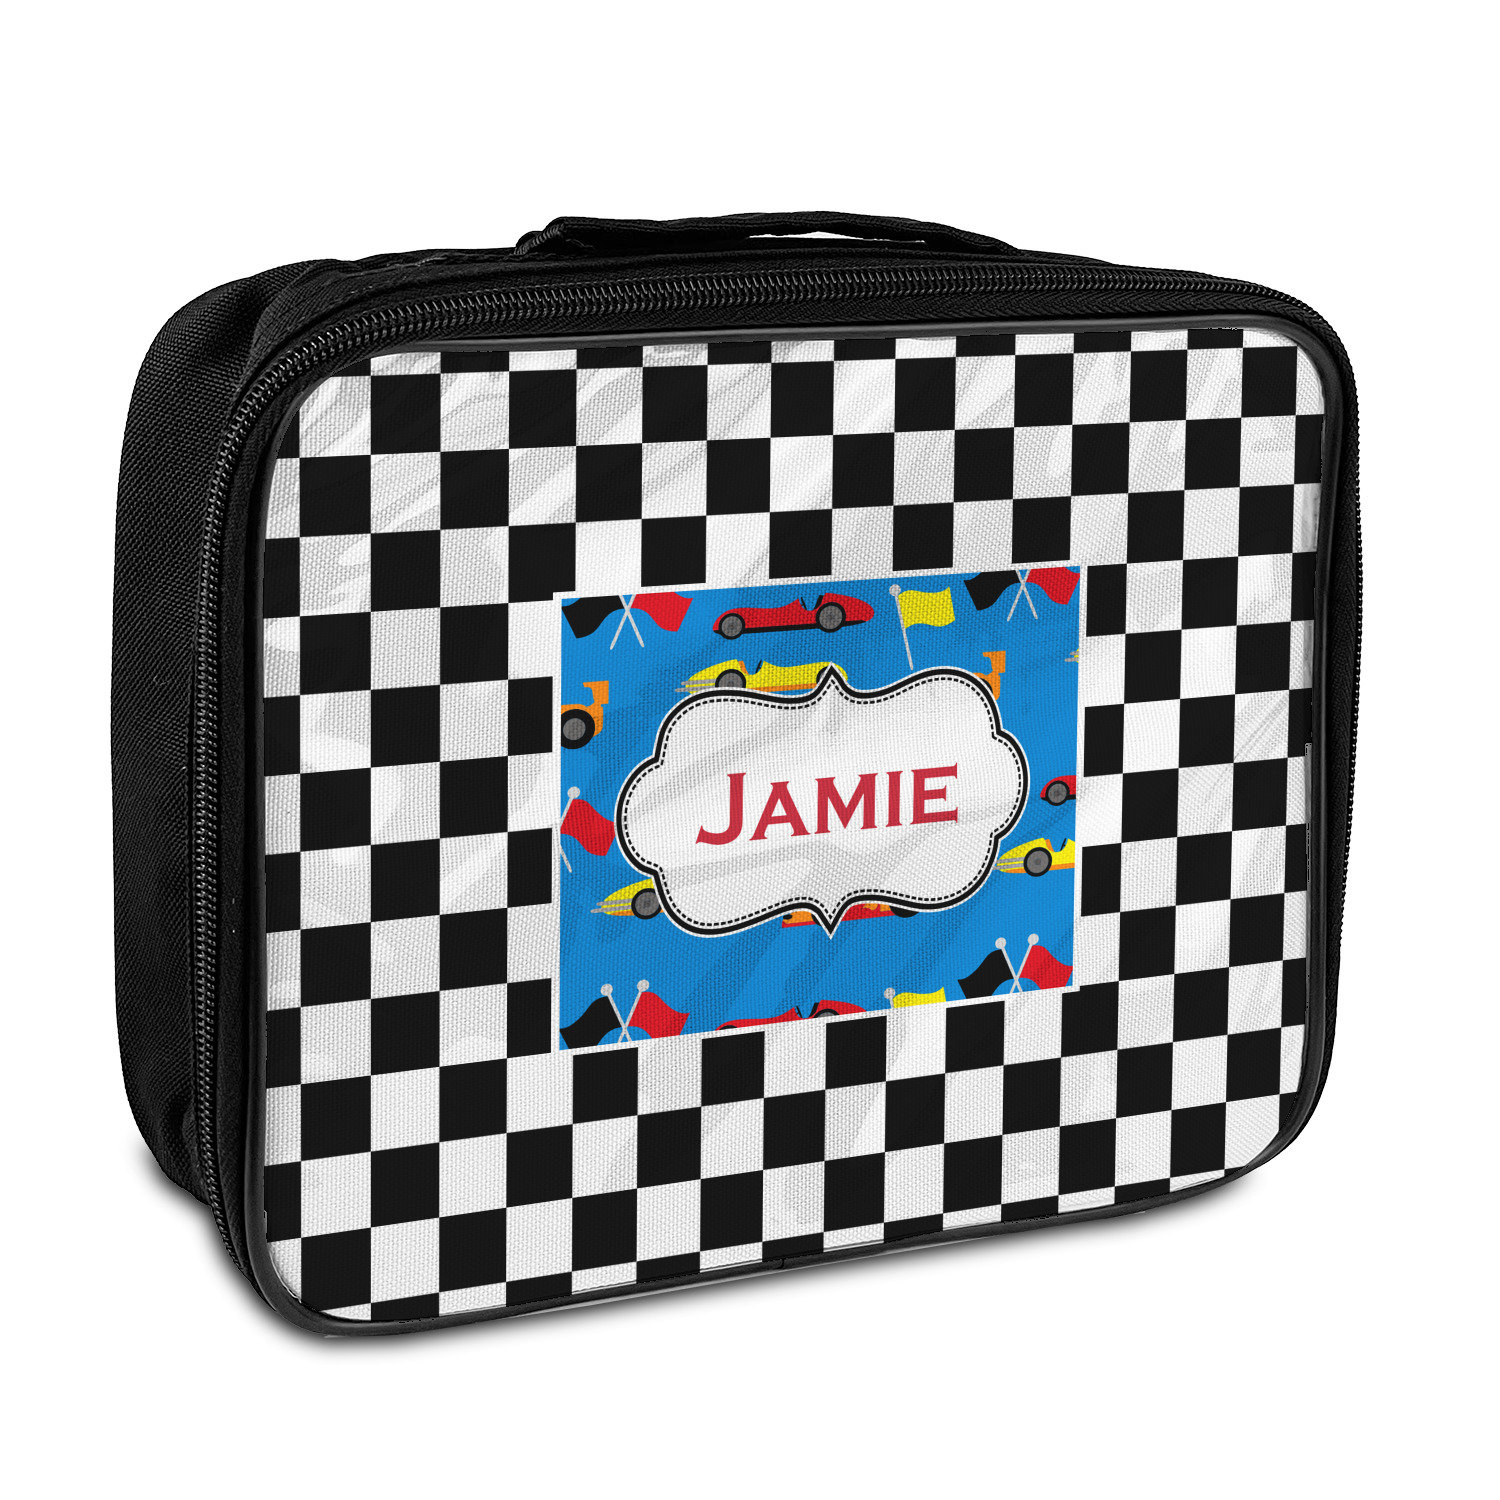 https://www.youcustomizeit.com/common/MAKE/357472/Checkers-Racecars-Insulated-Lunch-Bag-Personalized.jpg?lm=1636384398